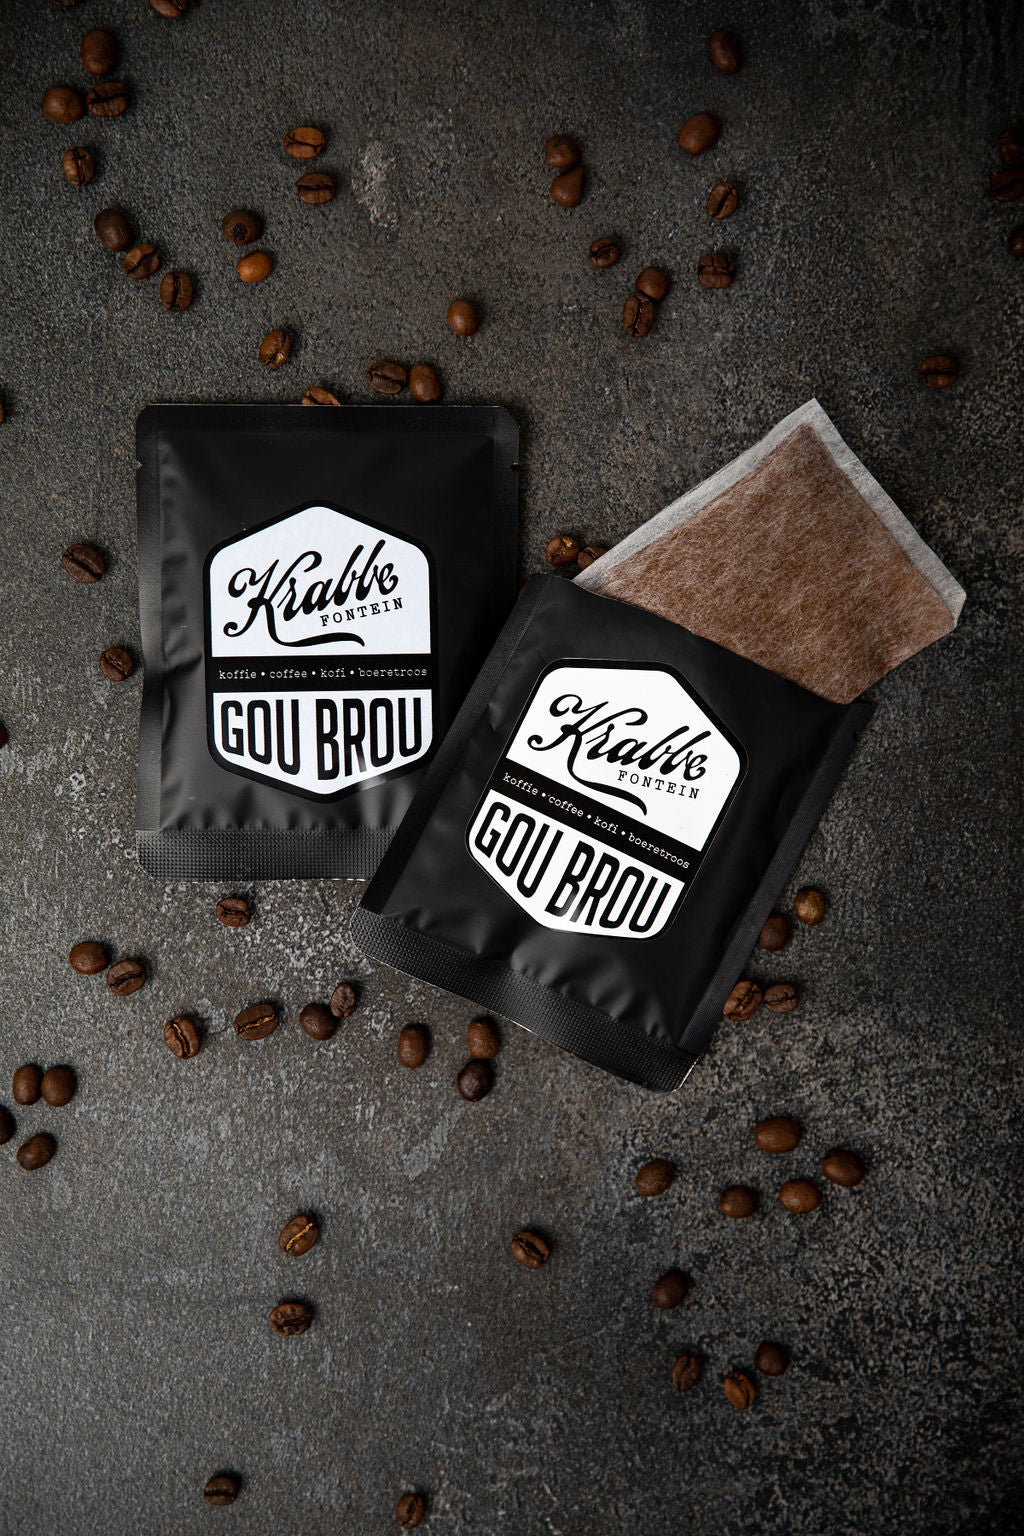 Krabbefontein Gou Brou Coffee Sachets. Best Coffee in South Africa. Bulk bag with 10 Sachets.